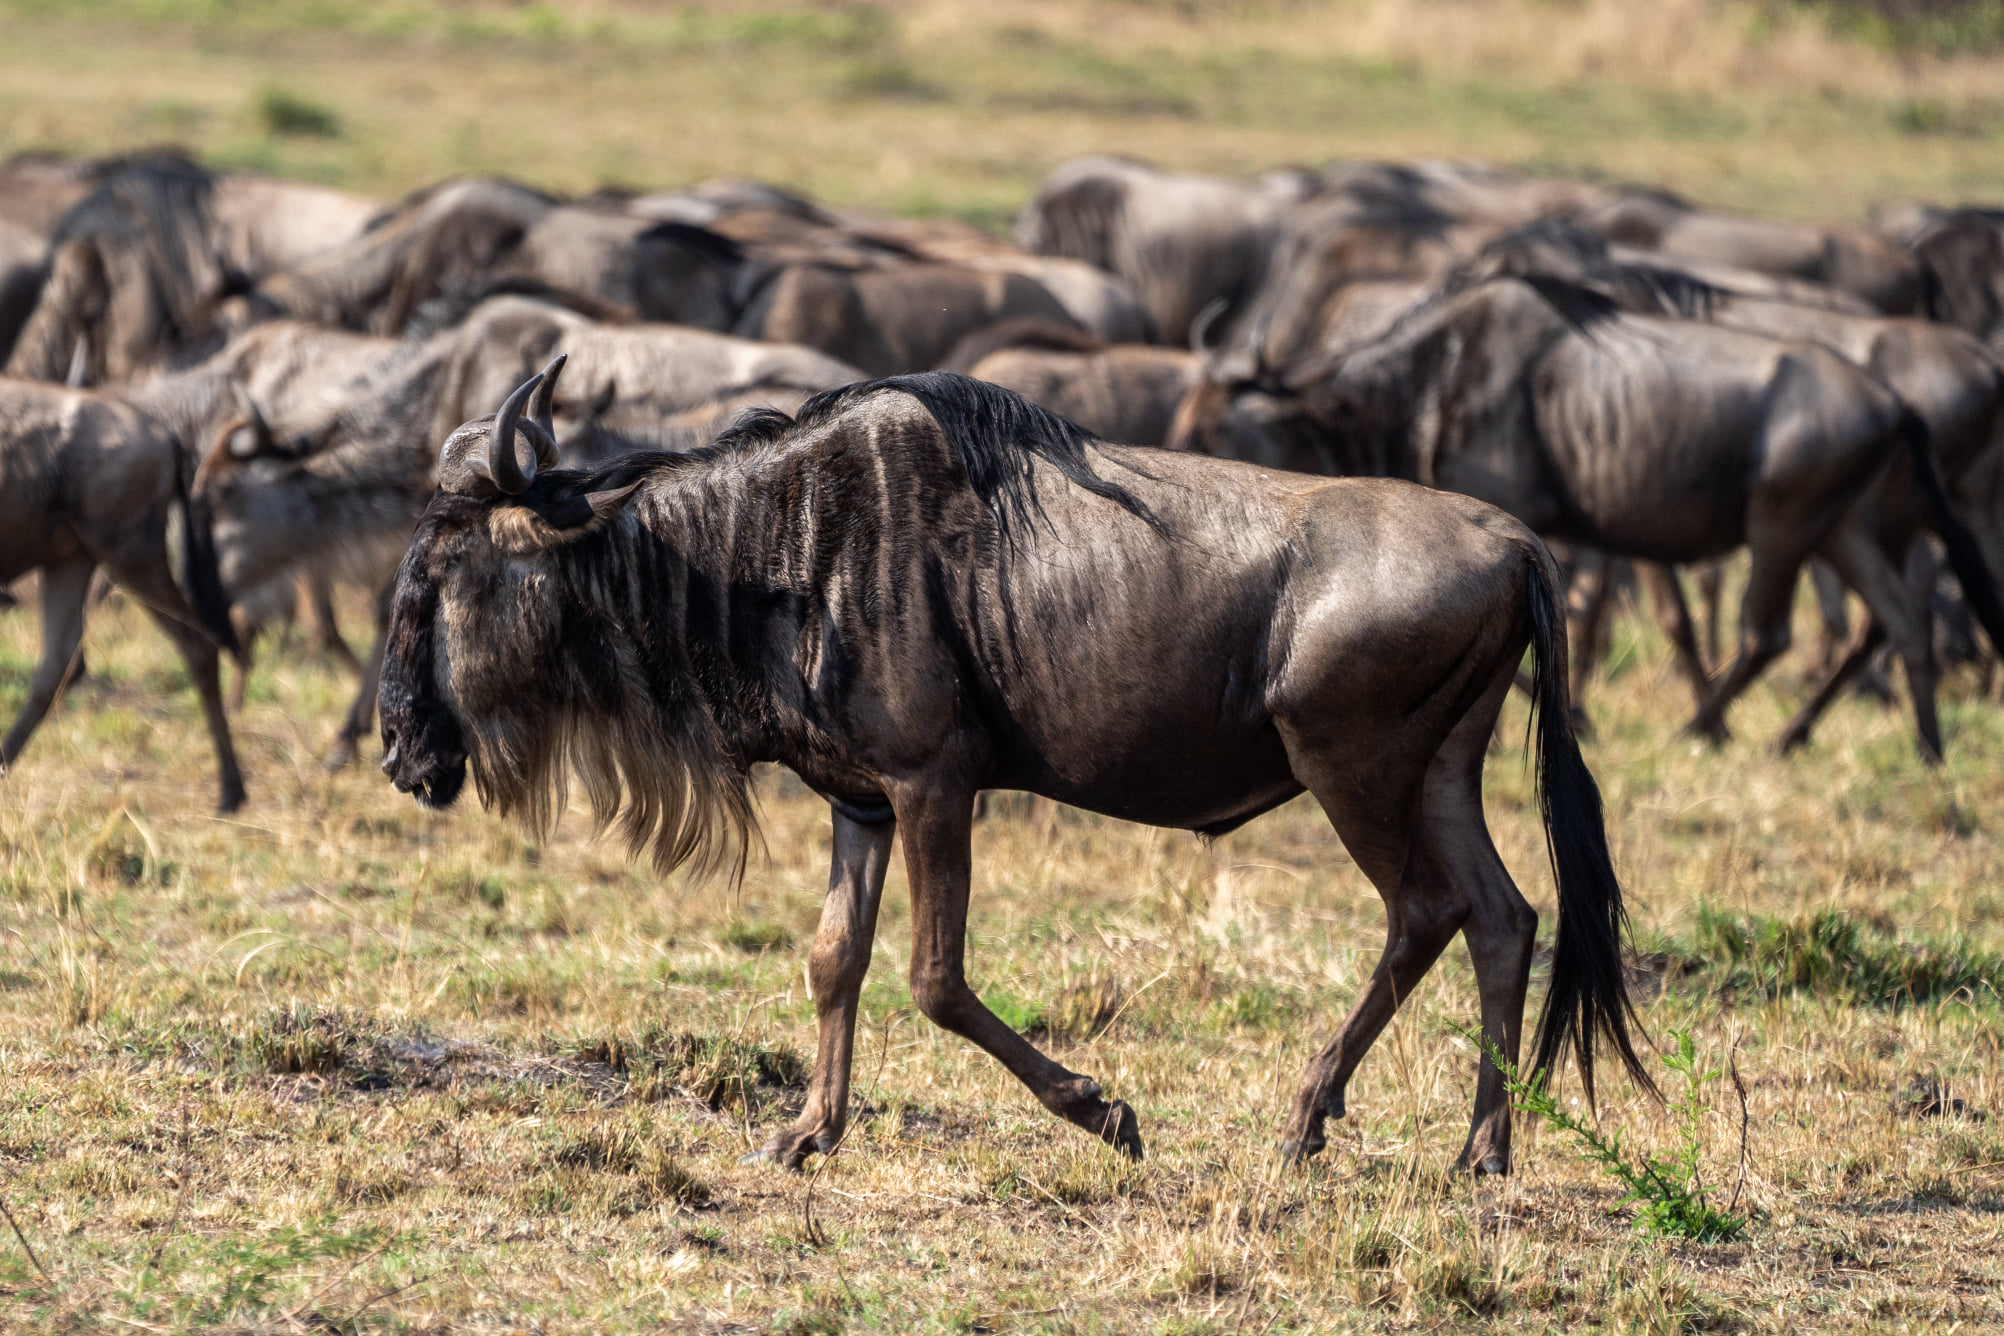 The great wildebeest migration in Serengeti National Park in Tanzania